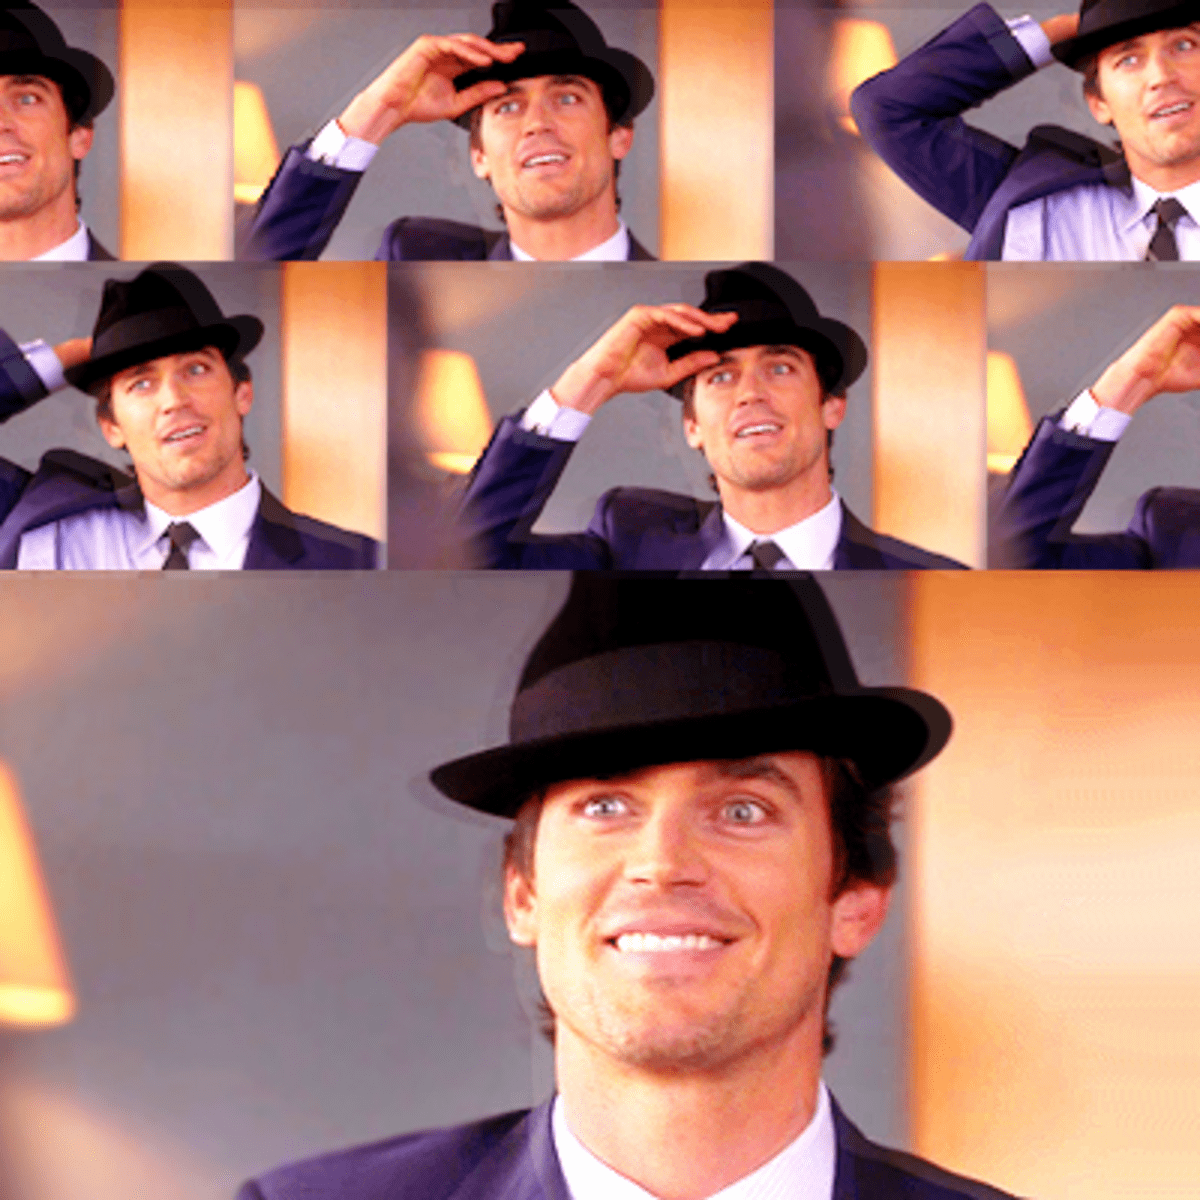 Buy A Neal Caffrey Fedora Hat - HubPages